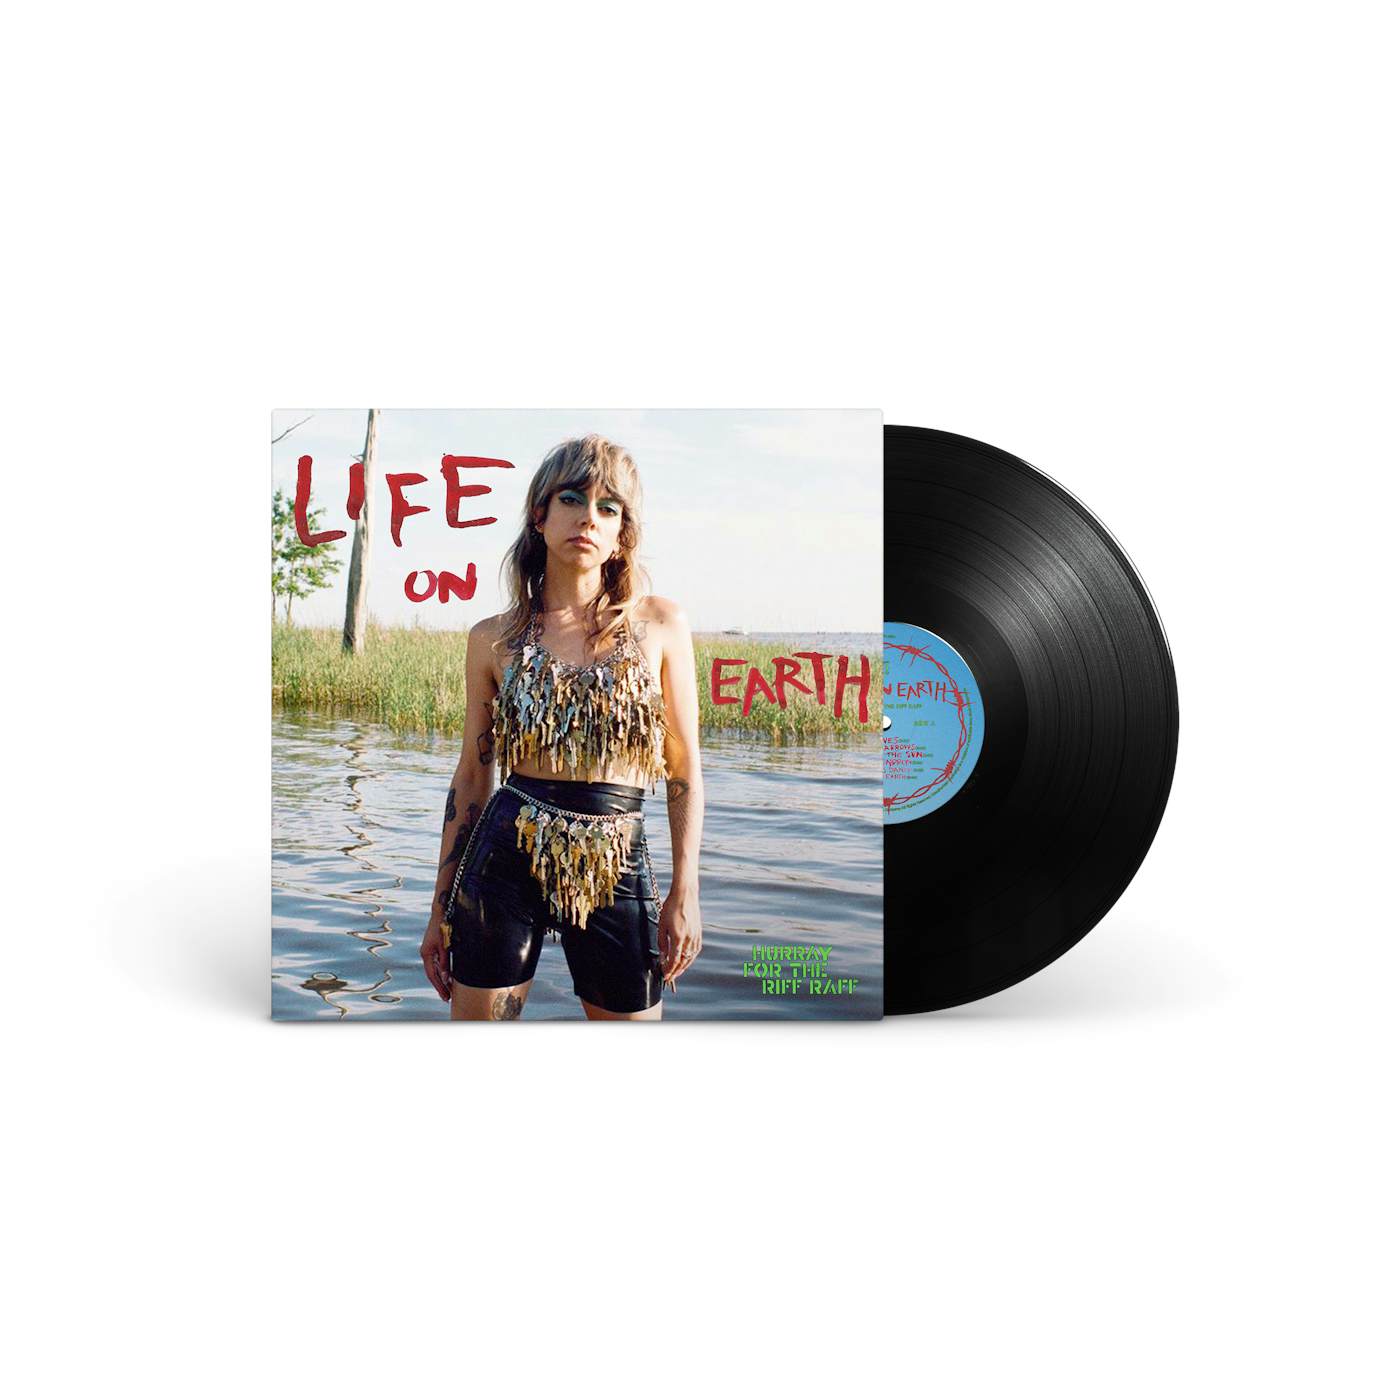 besejret Total accelerator Hurray For The Riff Raff | Life On Earth LP (Vinyl)